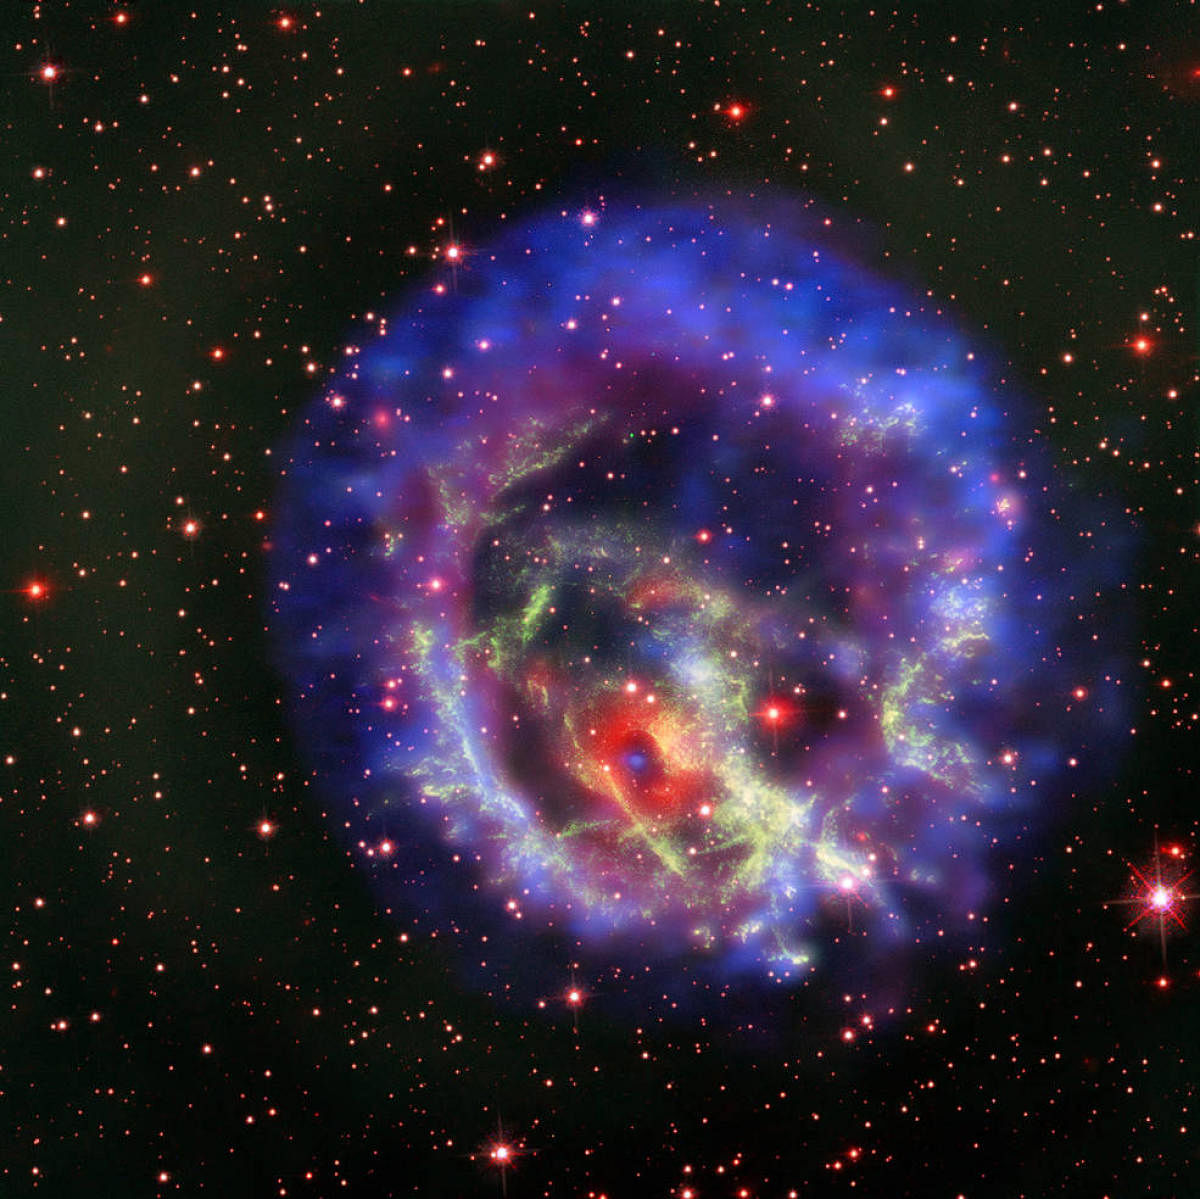 Supernova explosion 'gifted' Earth with gold, platinum